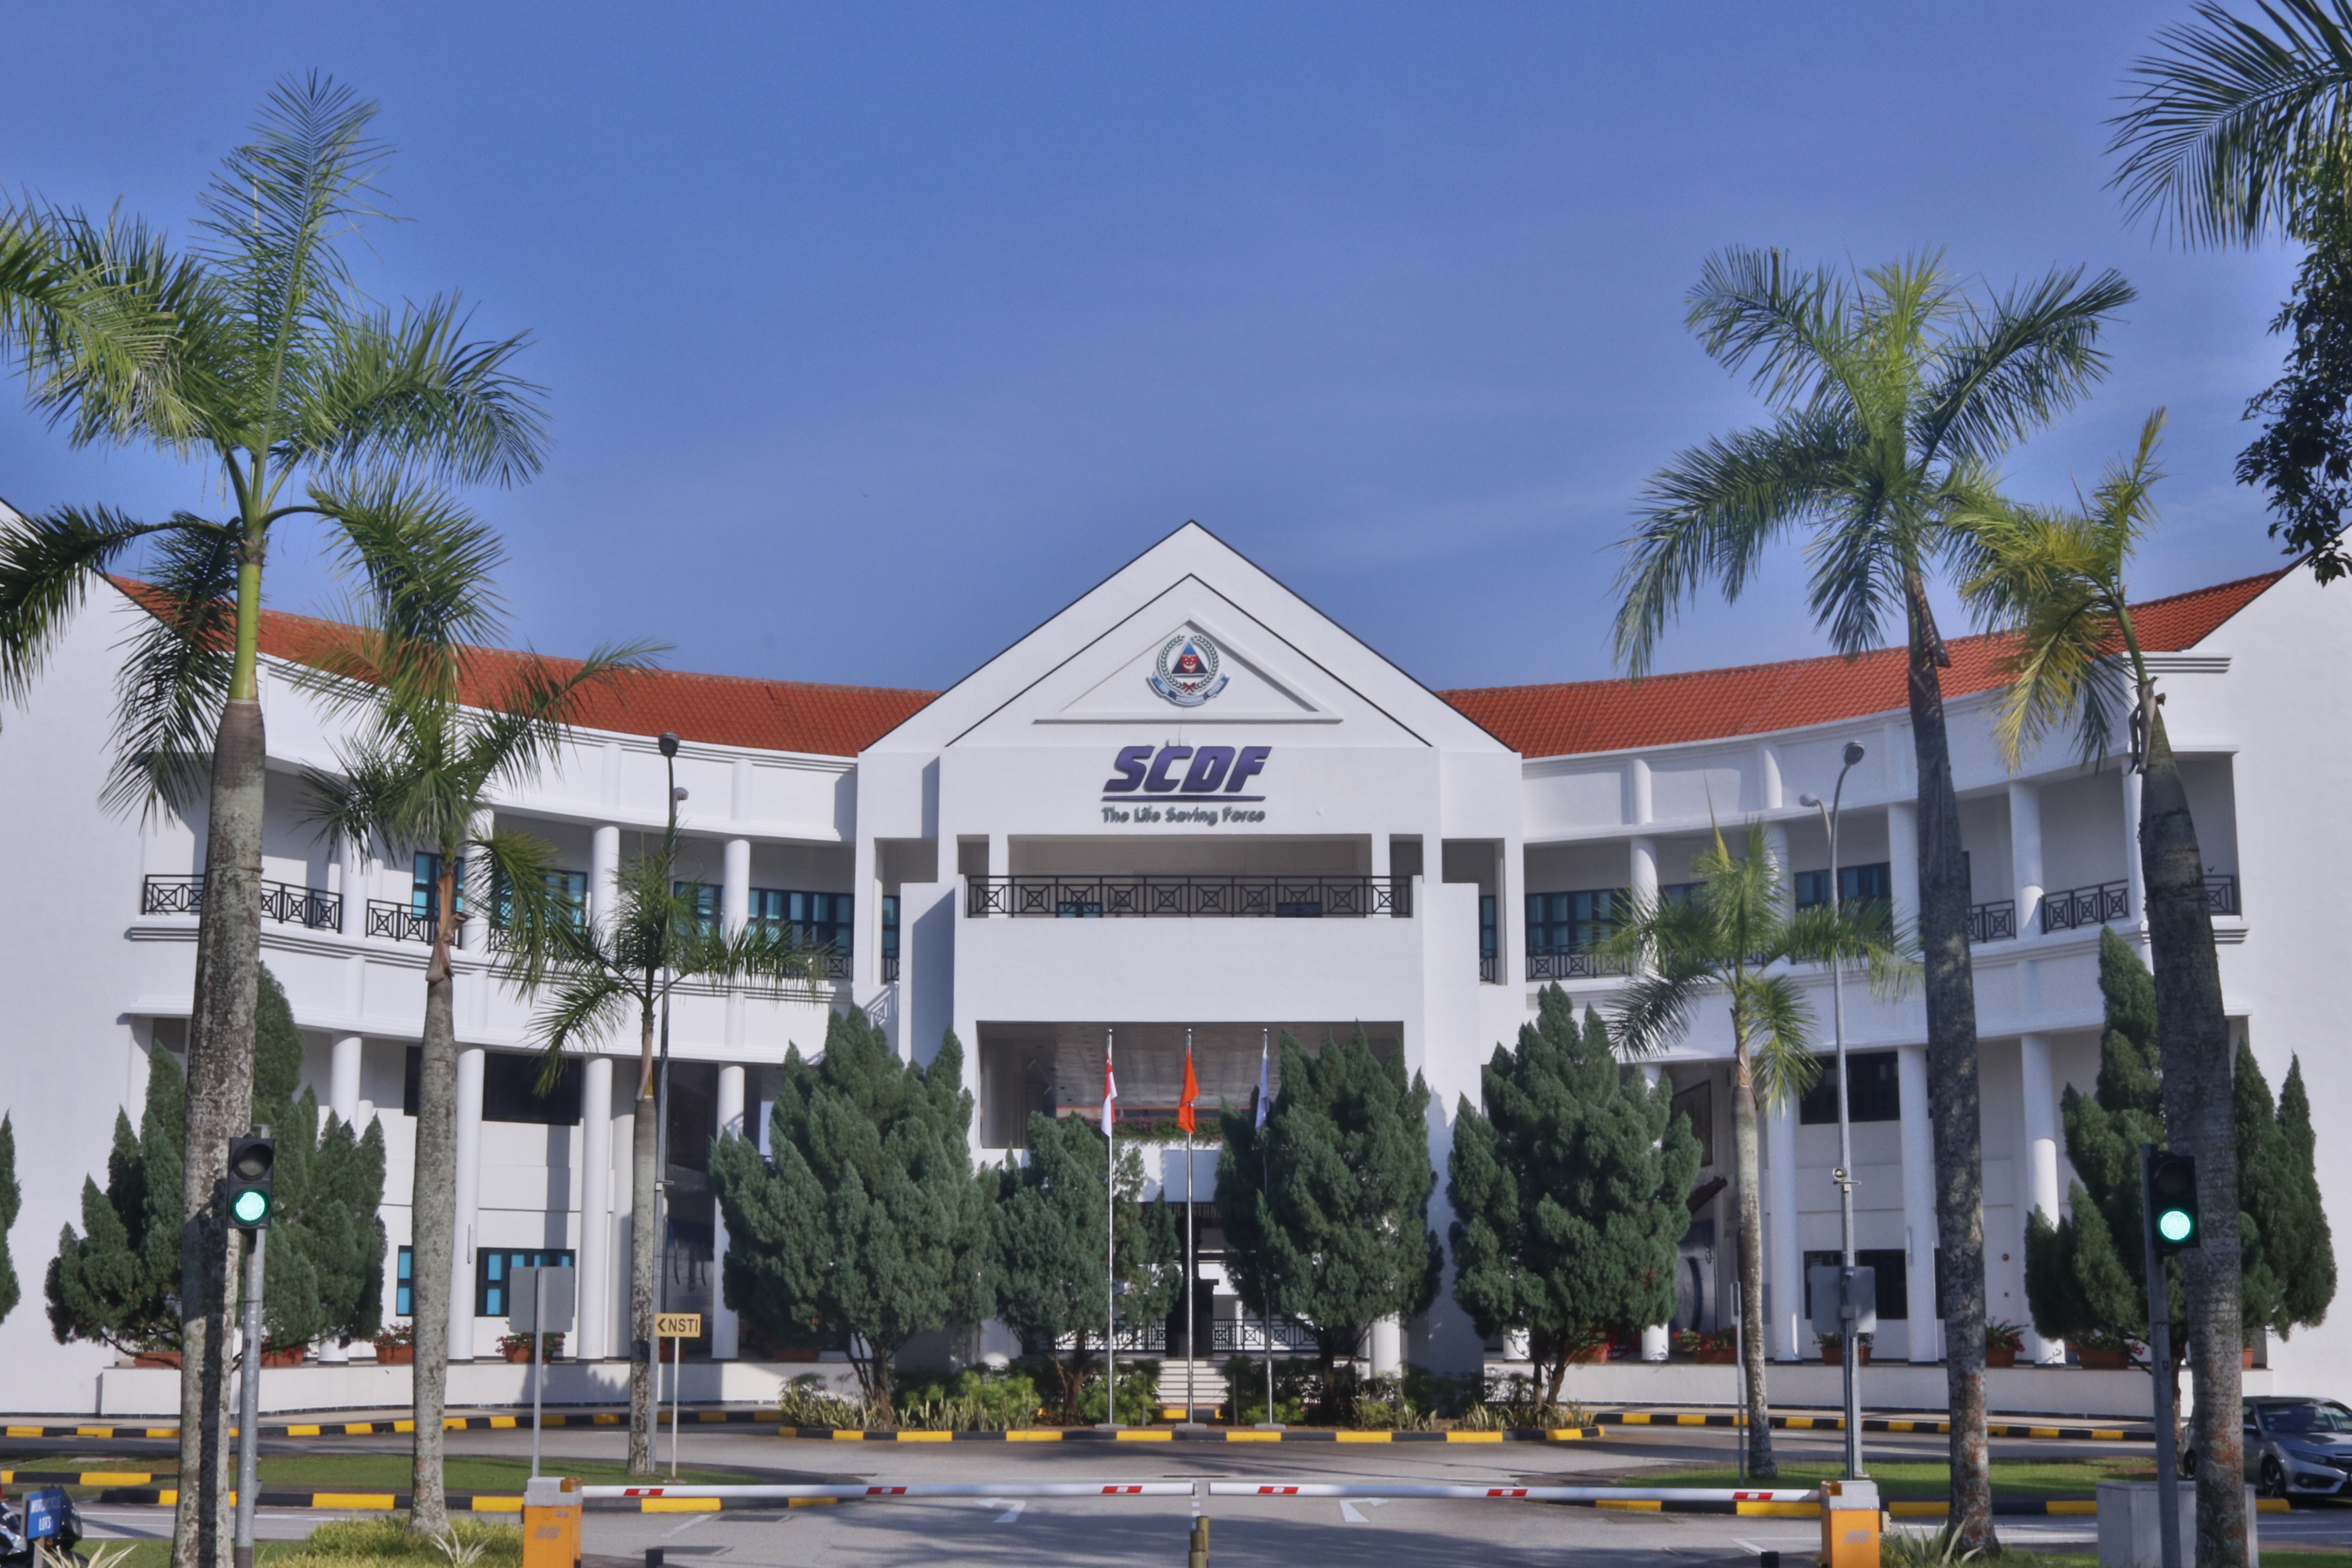 The Civil Defence Academy (1999 to present) where Encik Agayle continued to train many cohorts of trainees until the day he retired 15 Jul 2020.